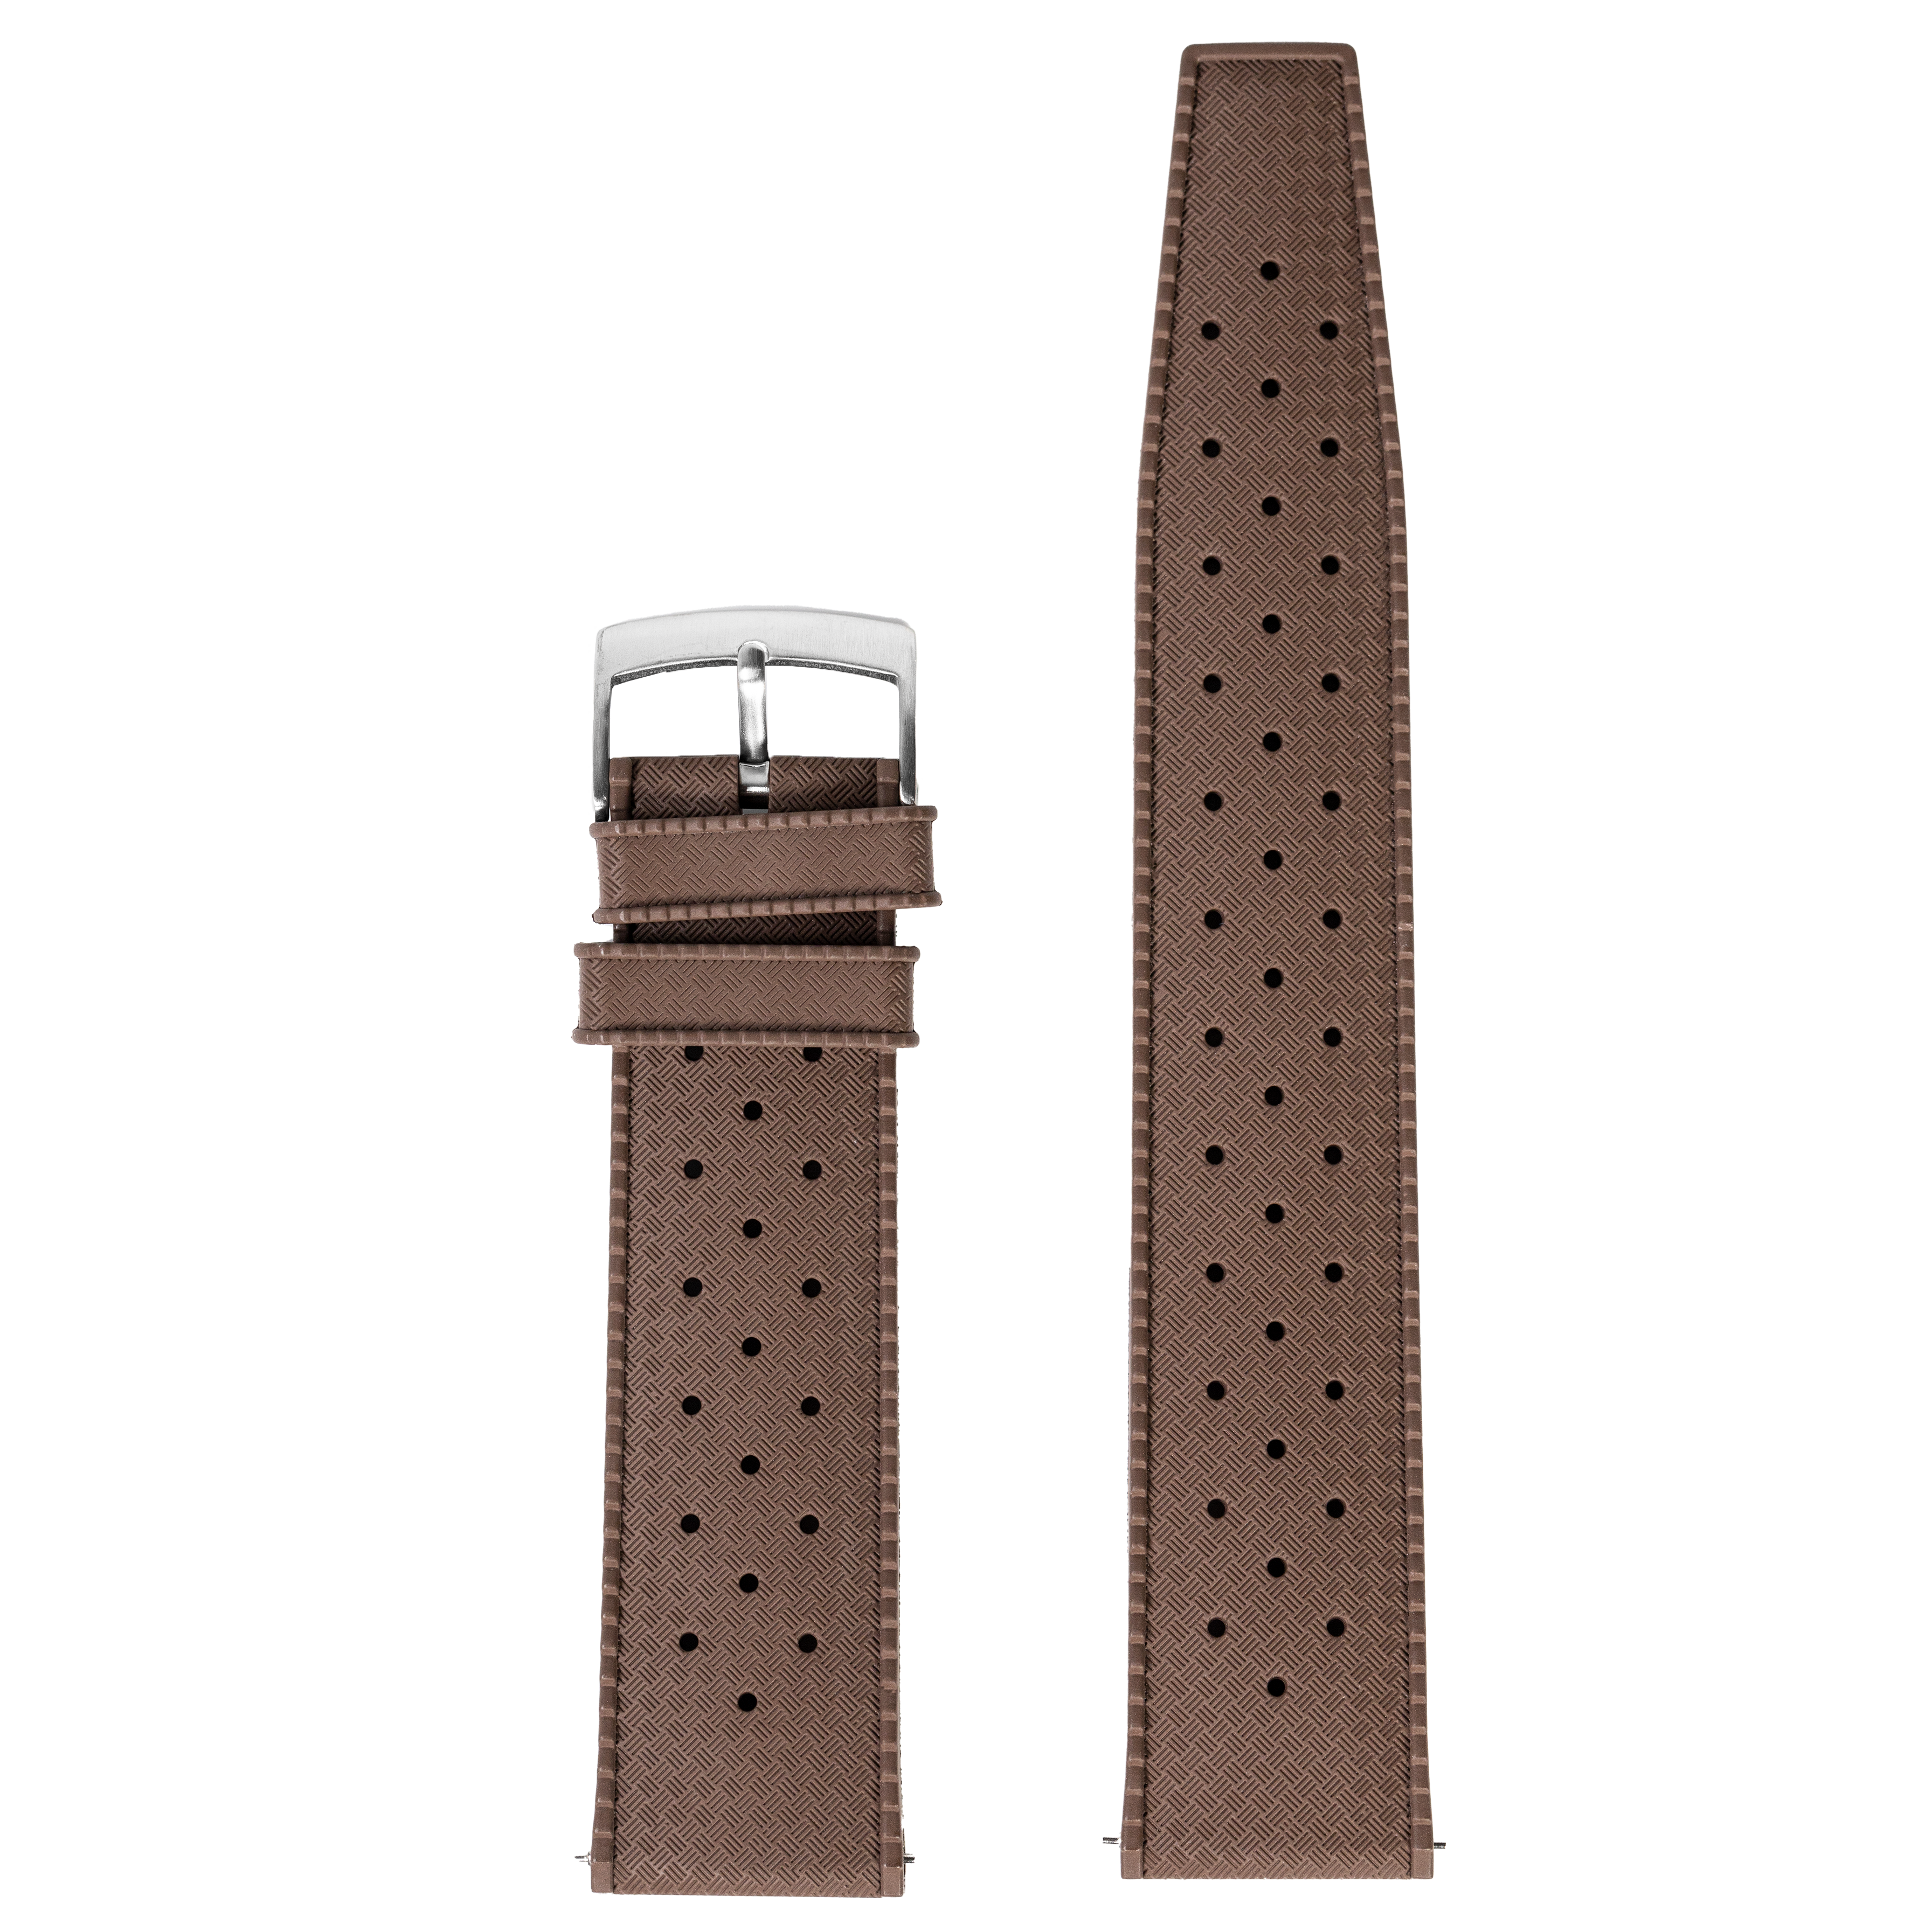 [QuickFit] King Tropic FKM Rubber - Brown 22mm